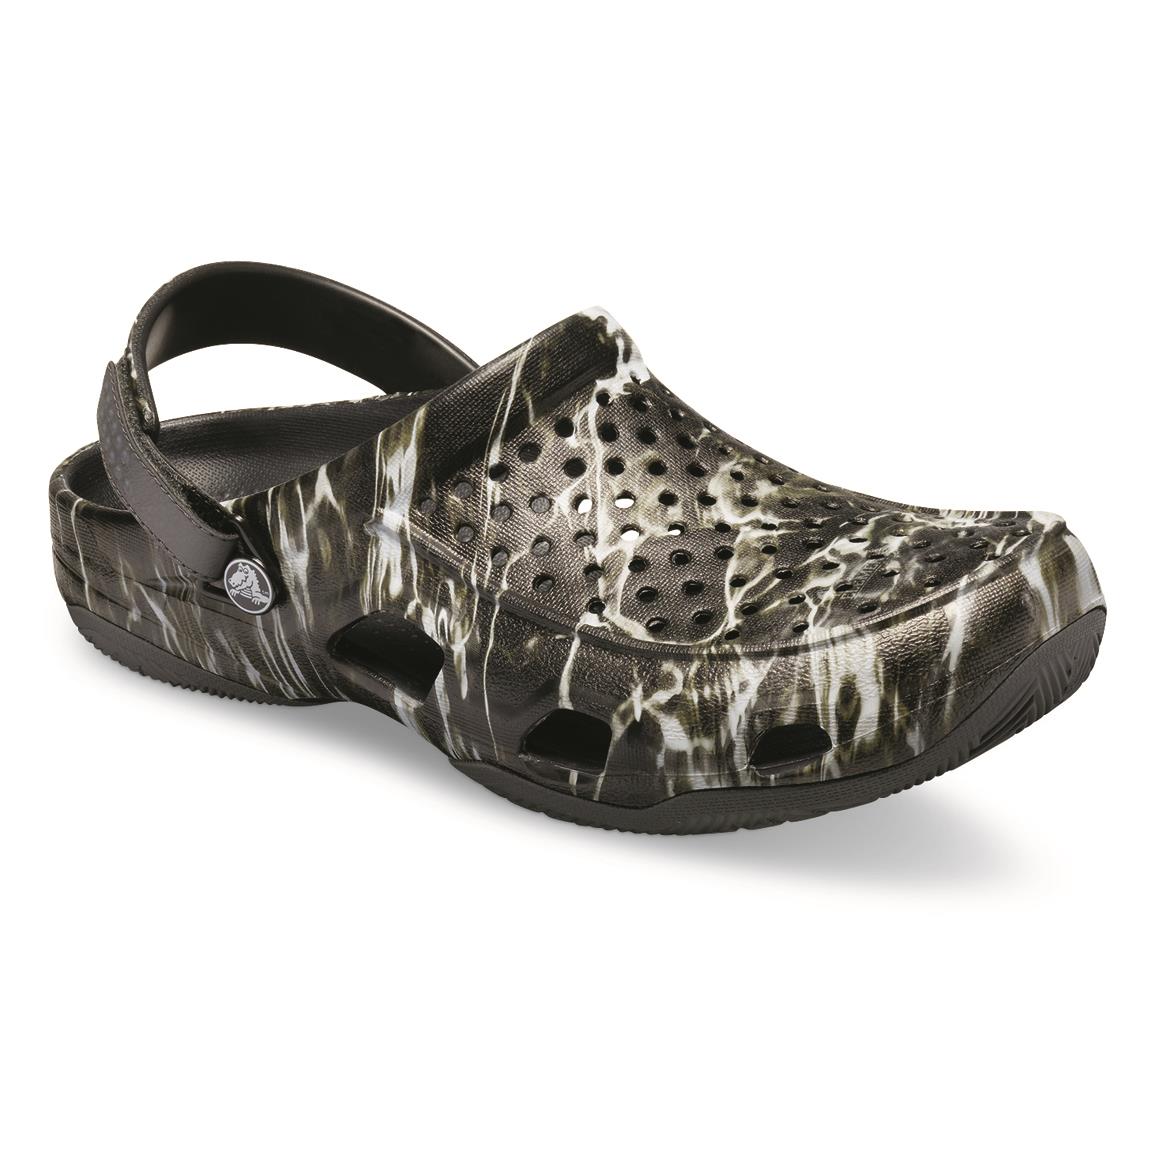  Crocs Swiftwater Camo  Deck Clogs 705121 Casual Shoes at 